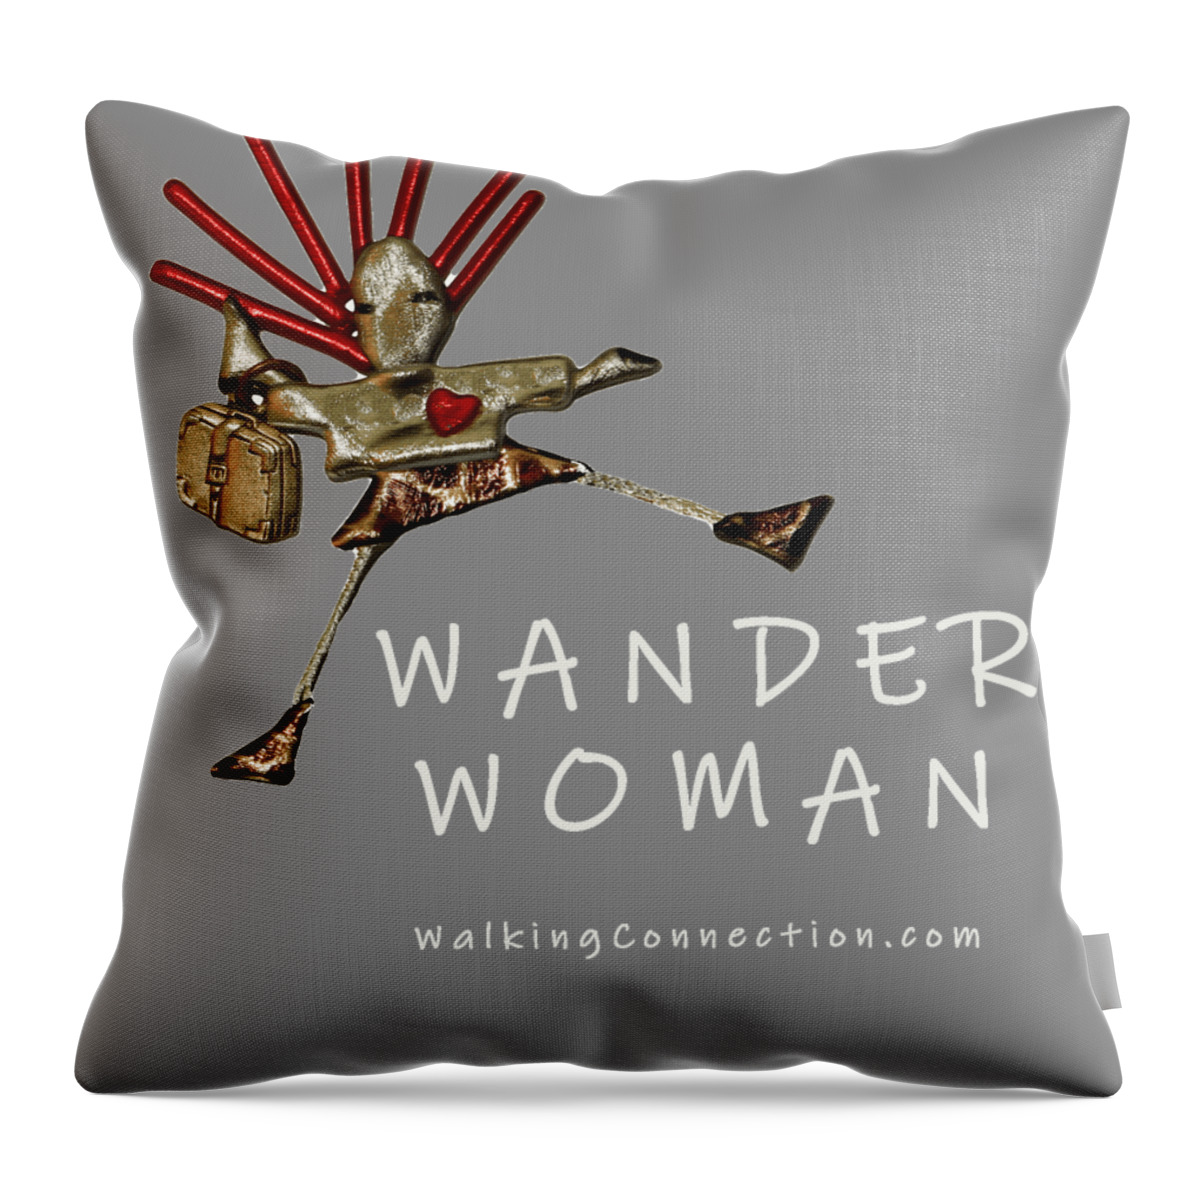 Wander Woman. Living Room Throw Pillow featuring the photograph Wander Woman by Gene Taylor